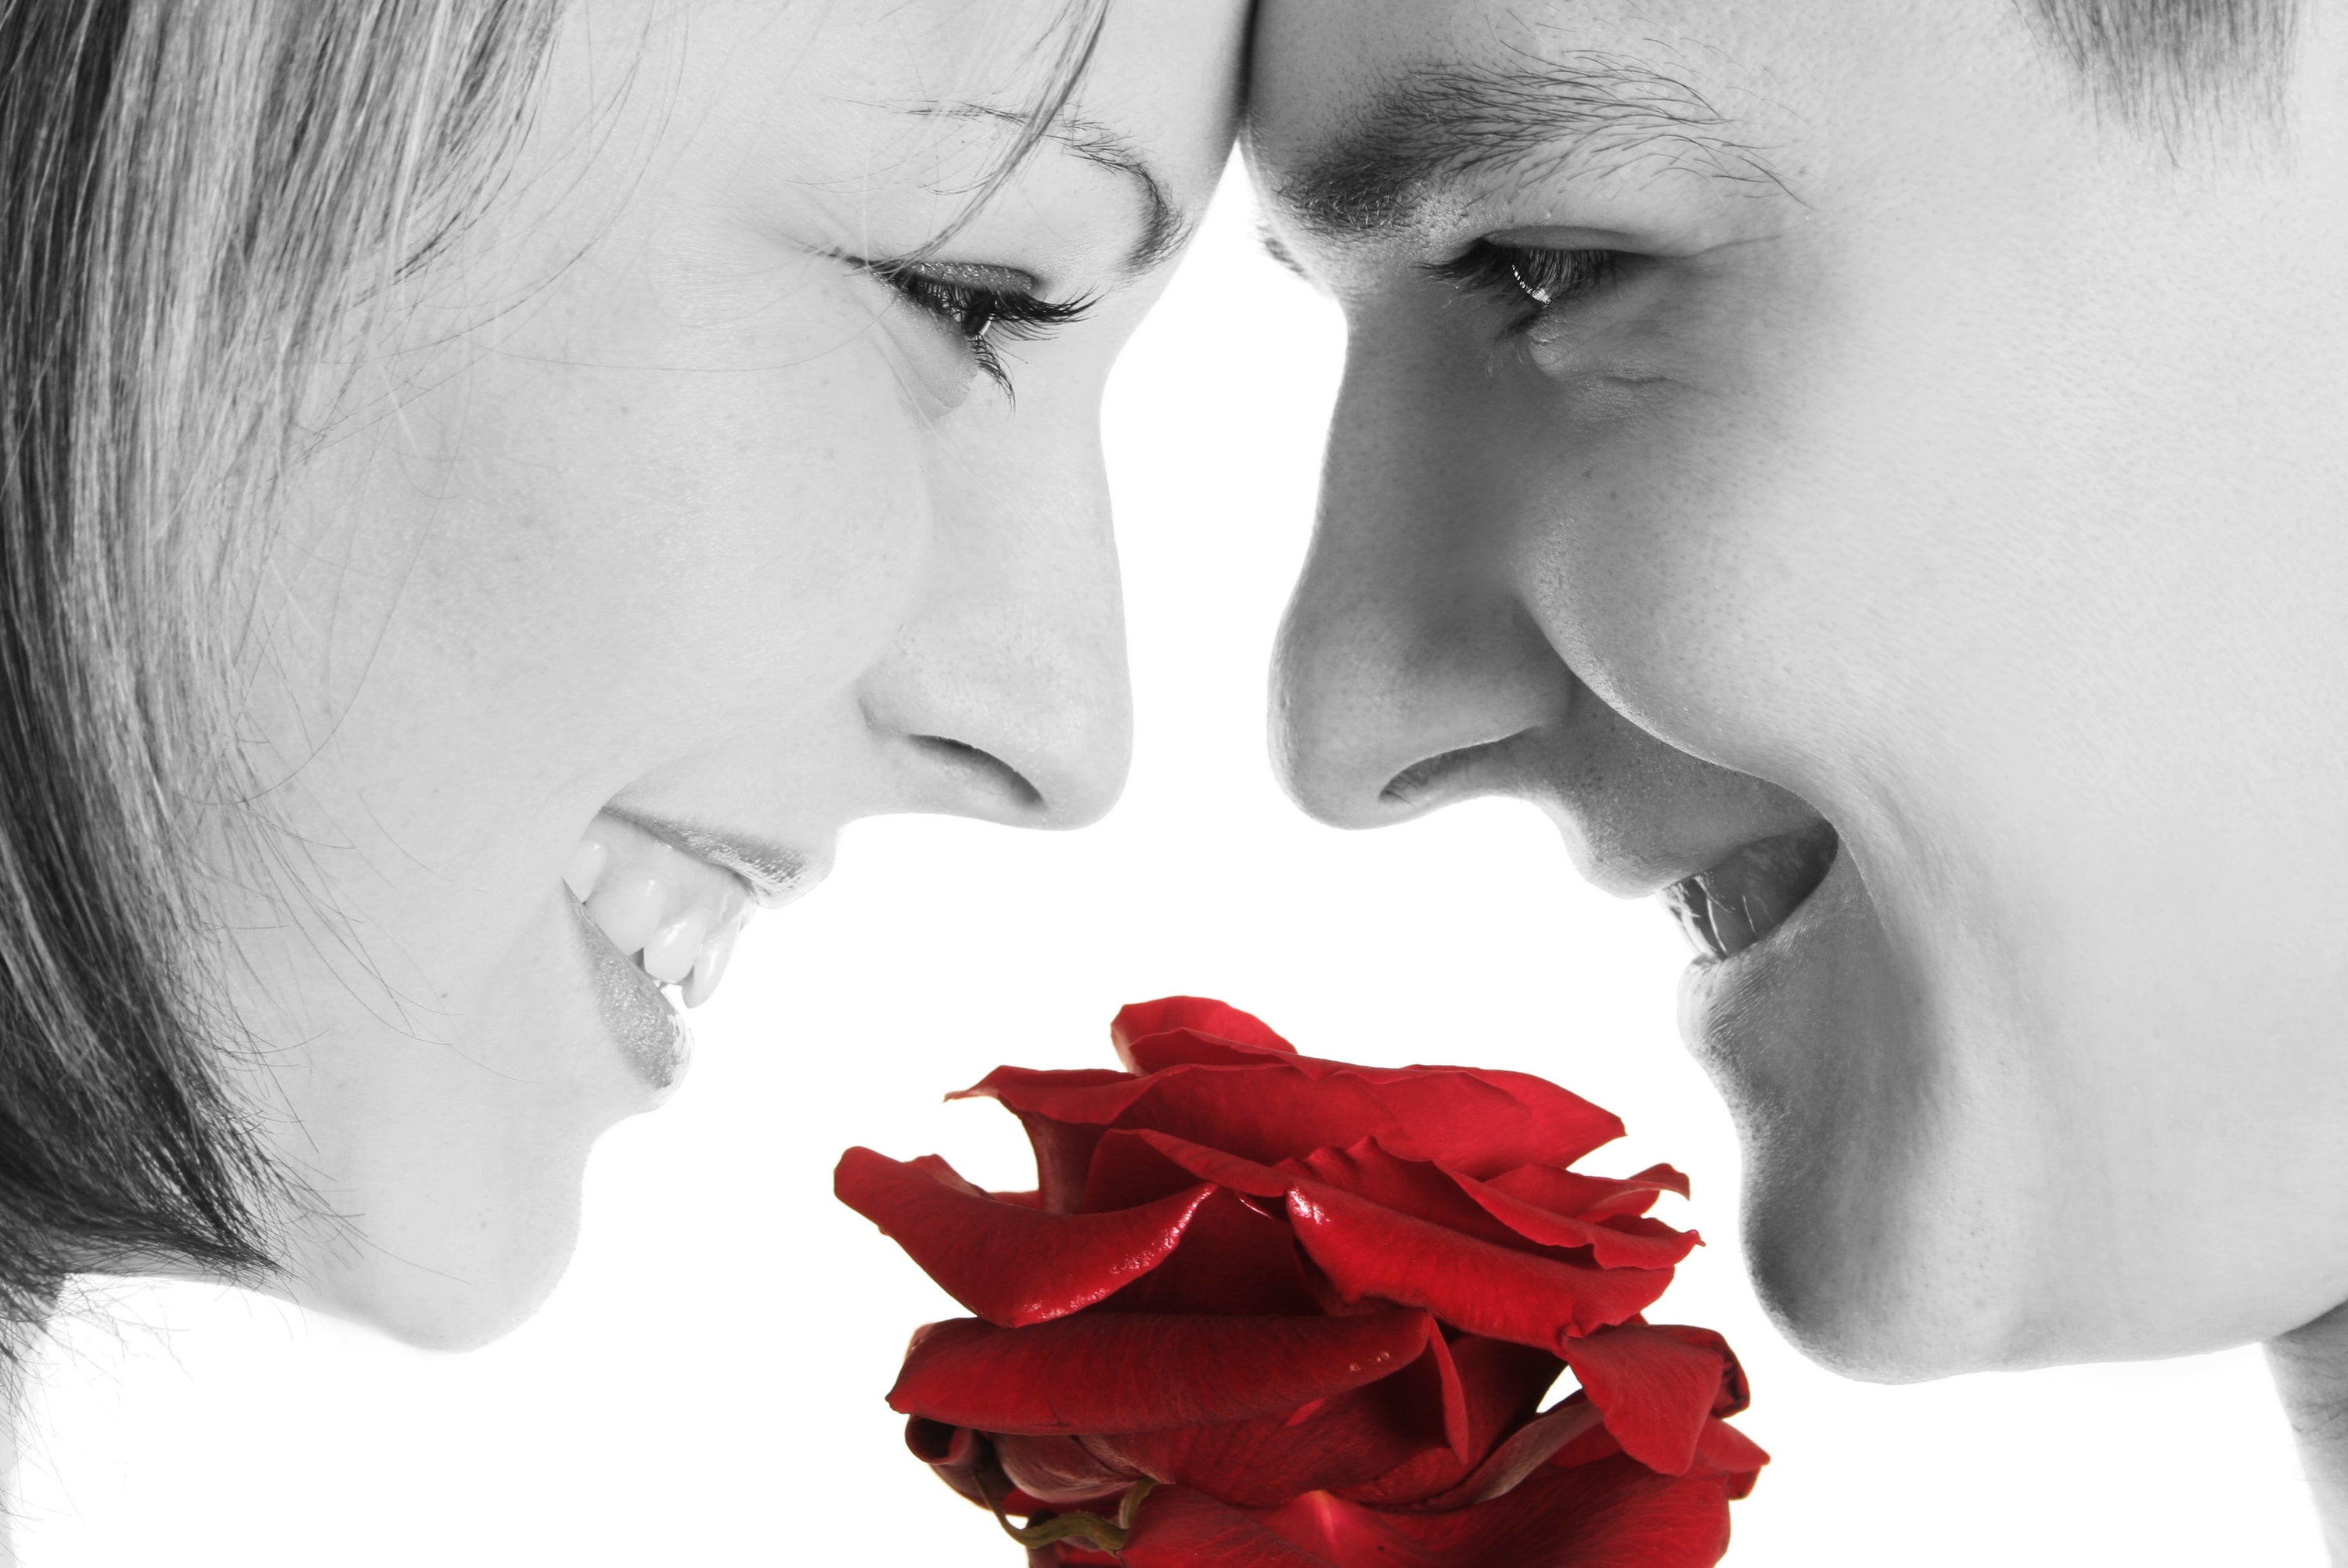 10 Romantic Inexpensive Gift Ideas For Your Girlfriend Or Wife